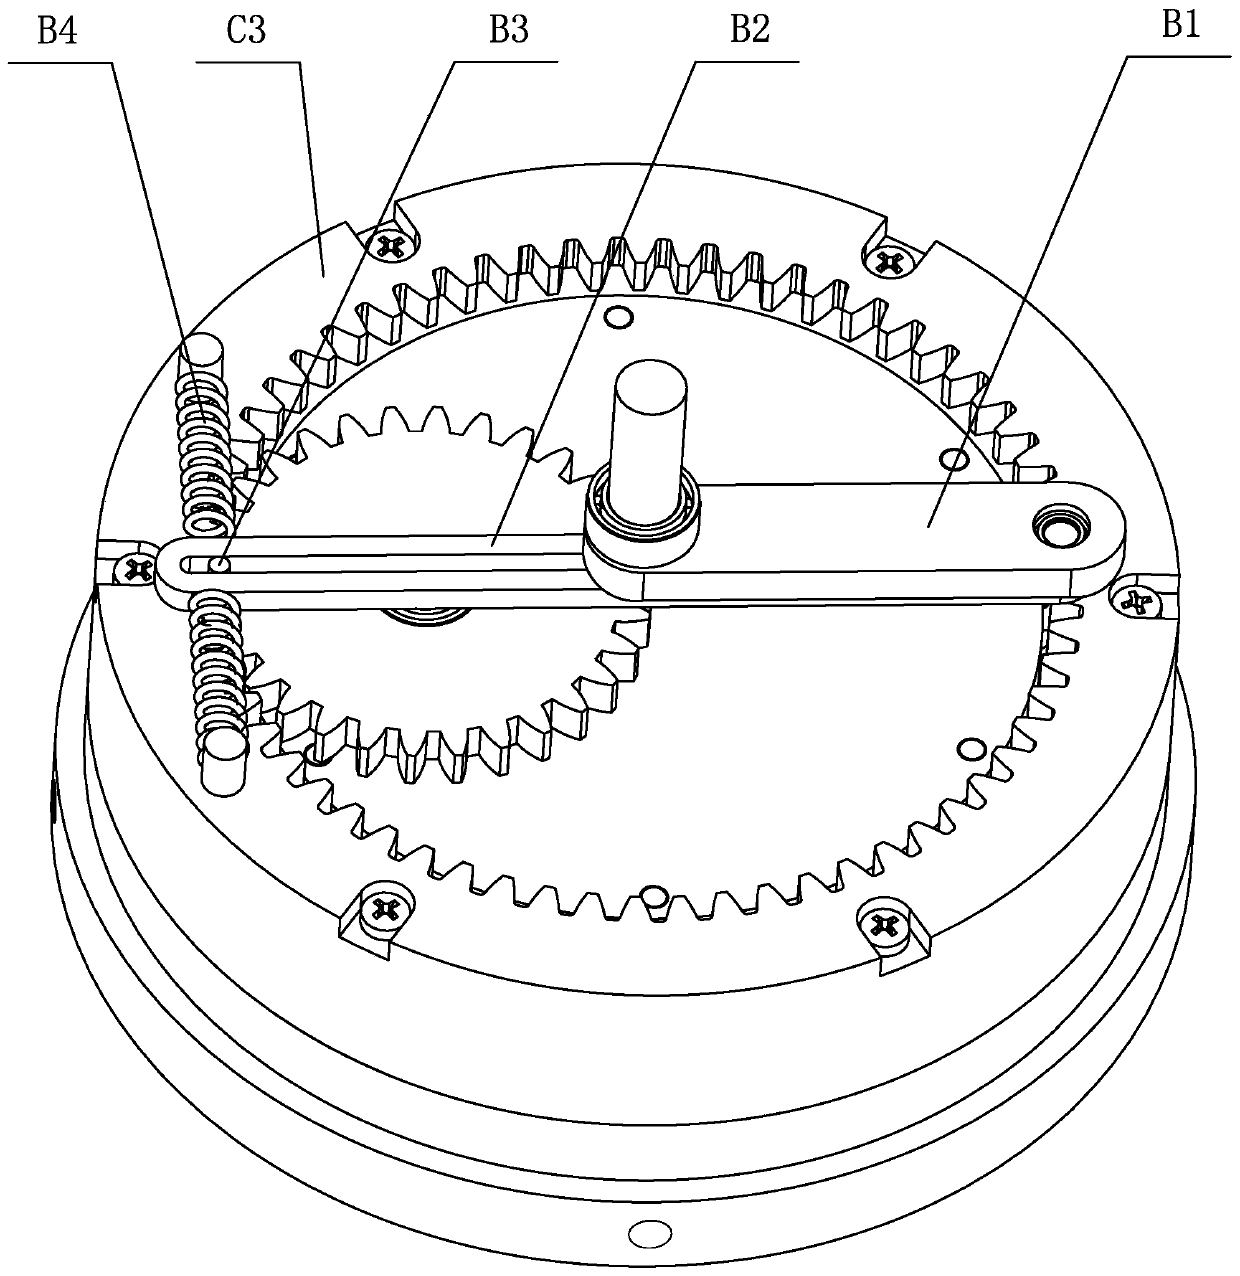 An energy-saving elastic joint with variable stiffness based on differential gear train